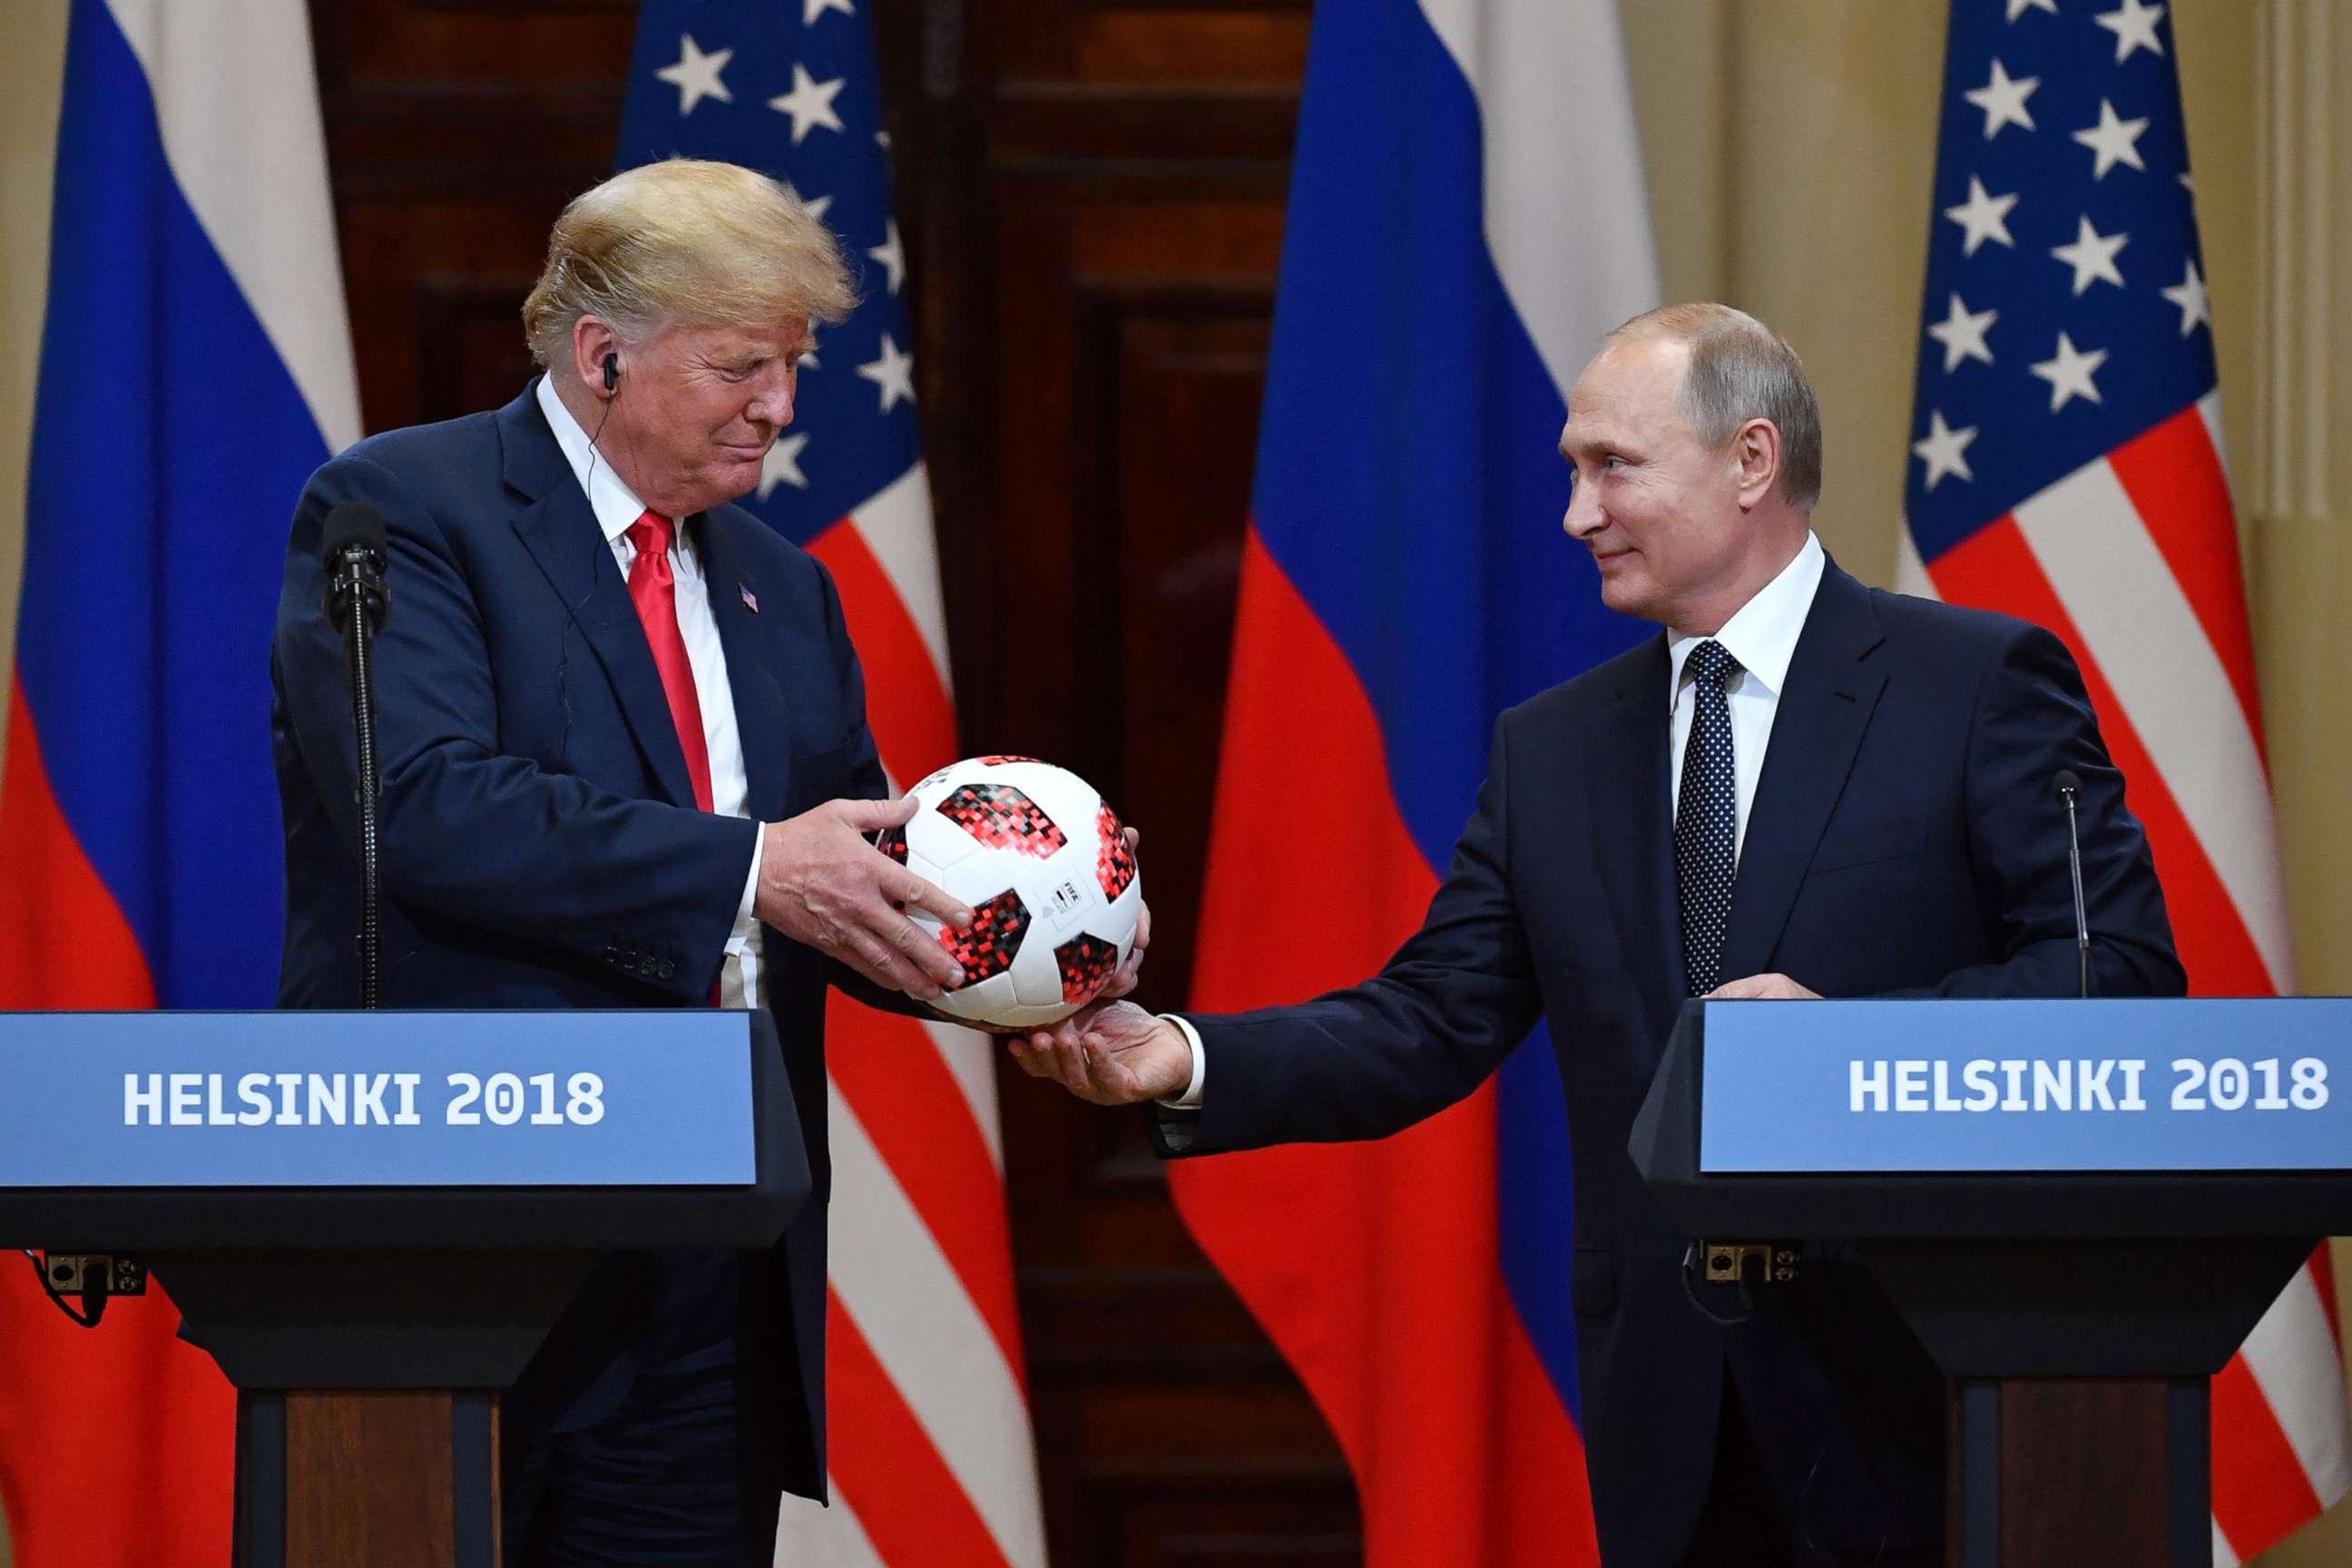 PHOTO: Russia's President Vladimir Putin offers a ball of the 2018 football World Cup to President Donald Trump during a joint press conference after a meeting at the Presidential Palace in Helsinki, Finland, July 16, 2018.